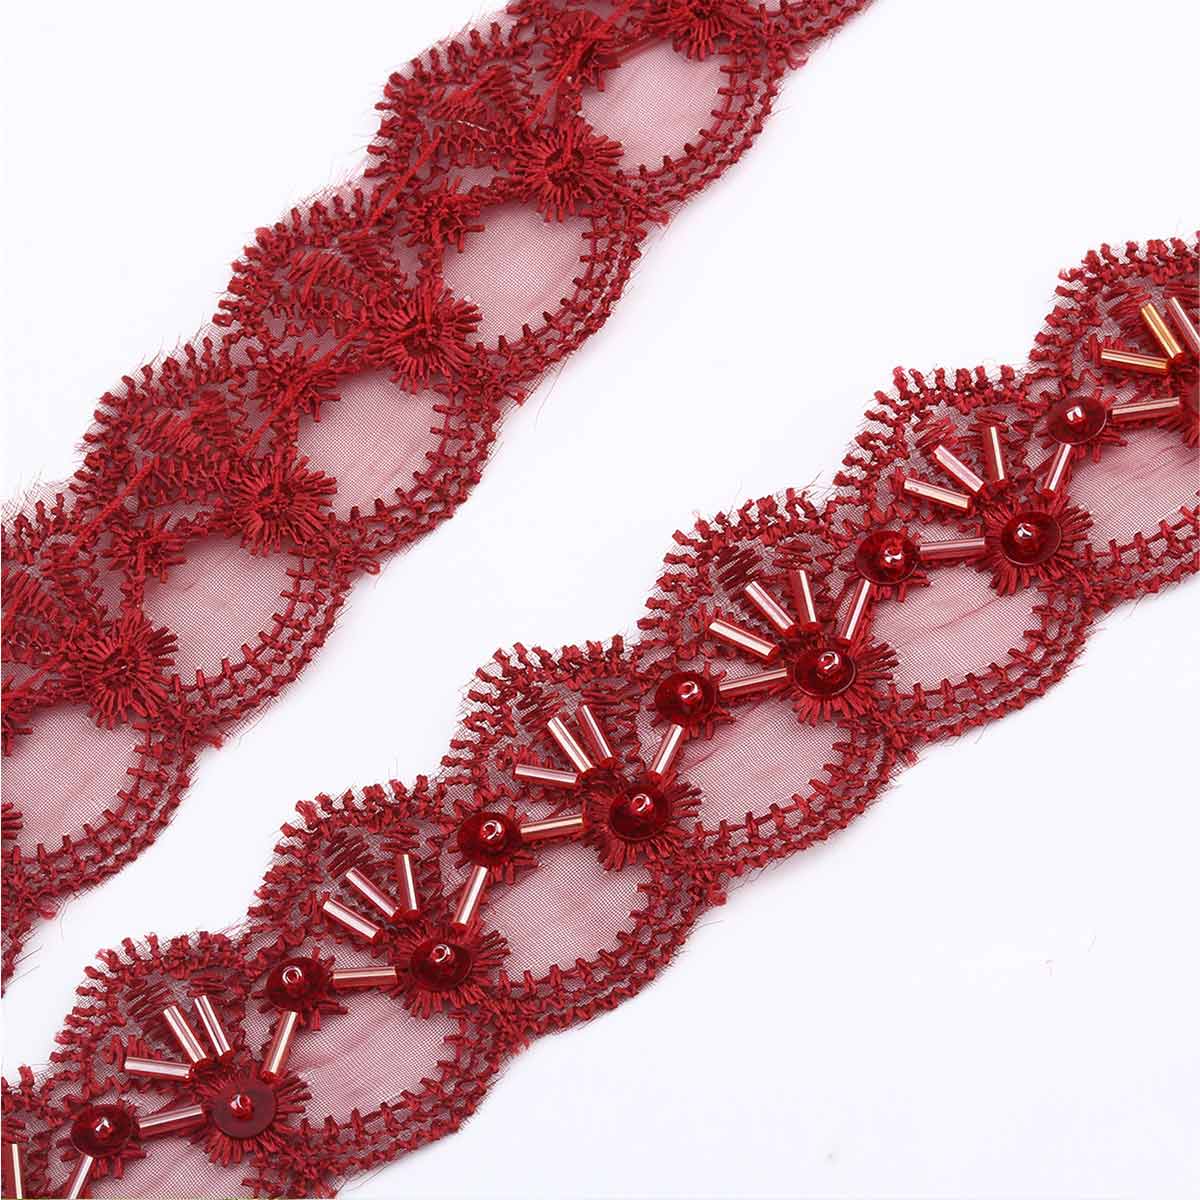 Sequin Lace Fabric dark red